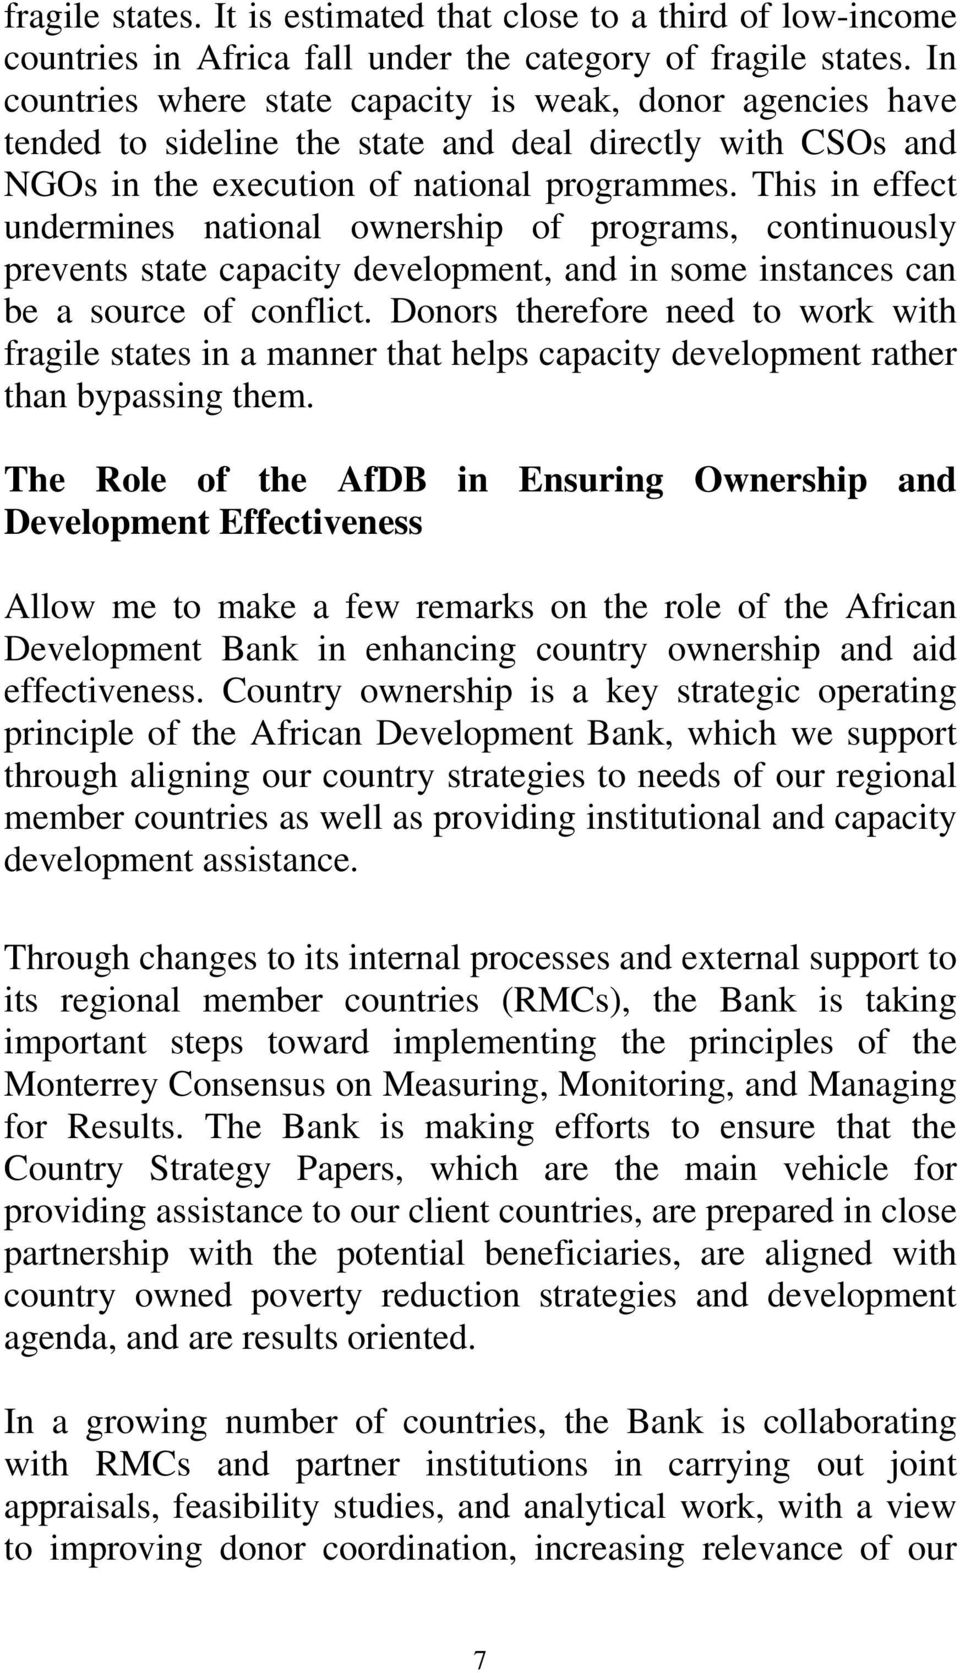 This in effect undermines national ownership of programs, continuously prevents state capacity development, and in some instances can be a source of conflict.